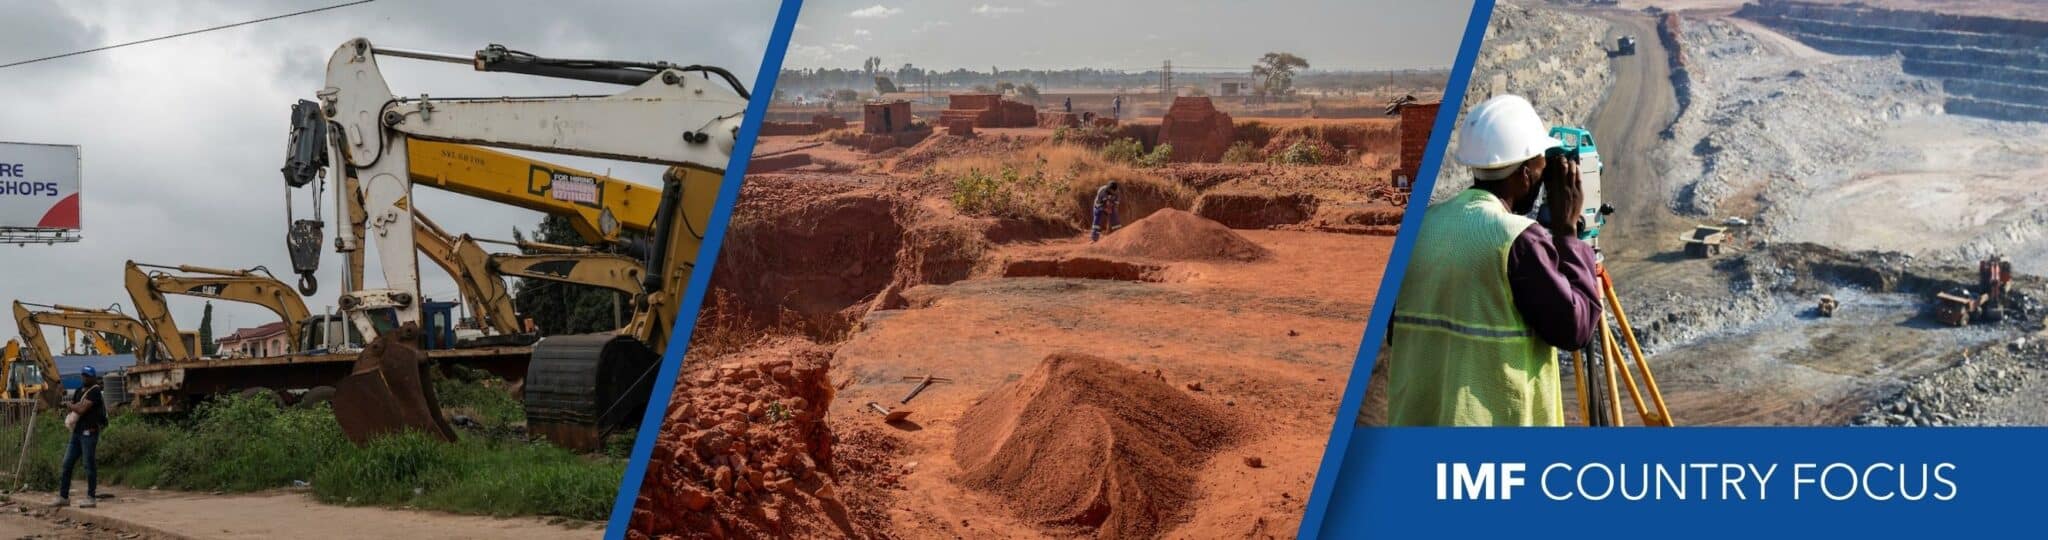 Harnessing Sub-Saharan Africa’s Critical Mineral Wealth